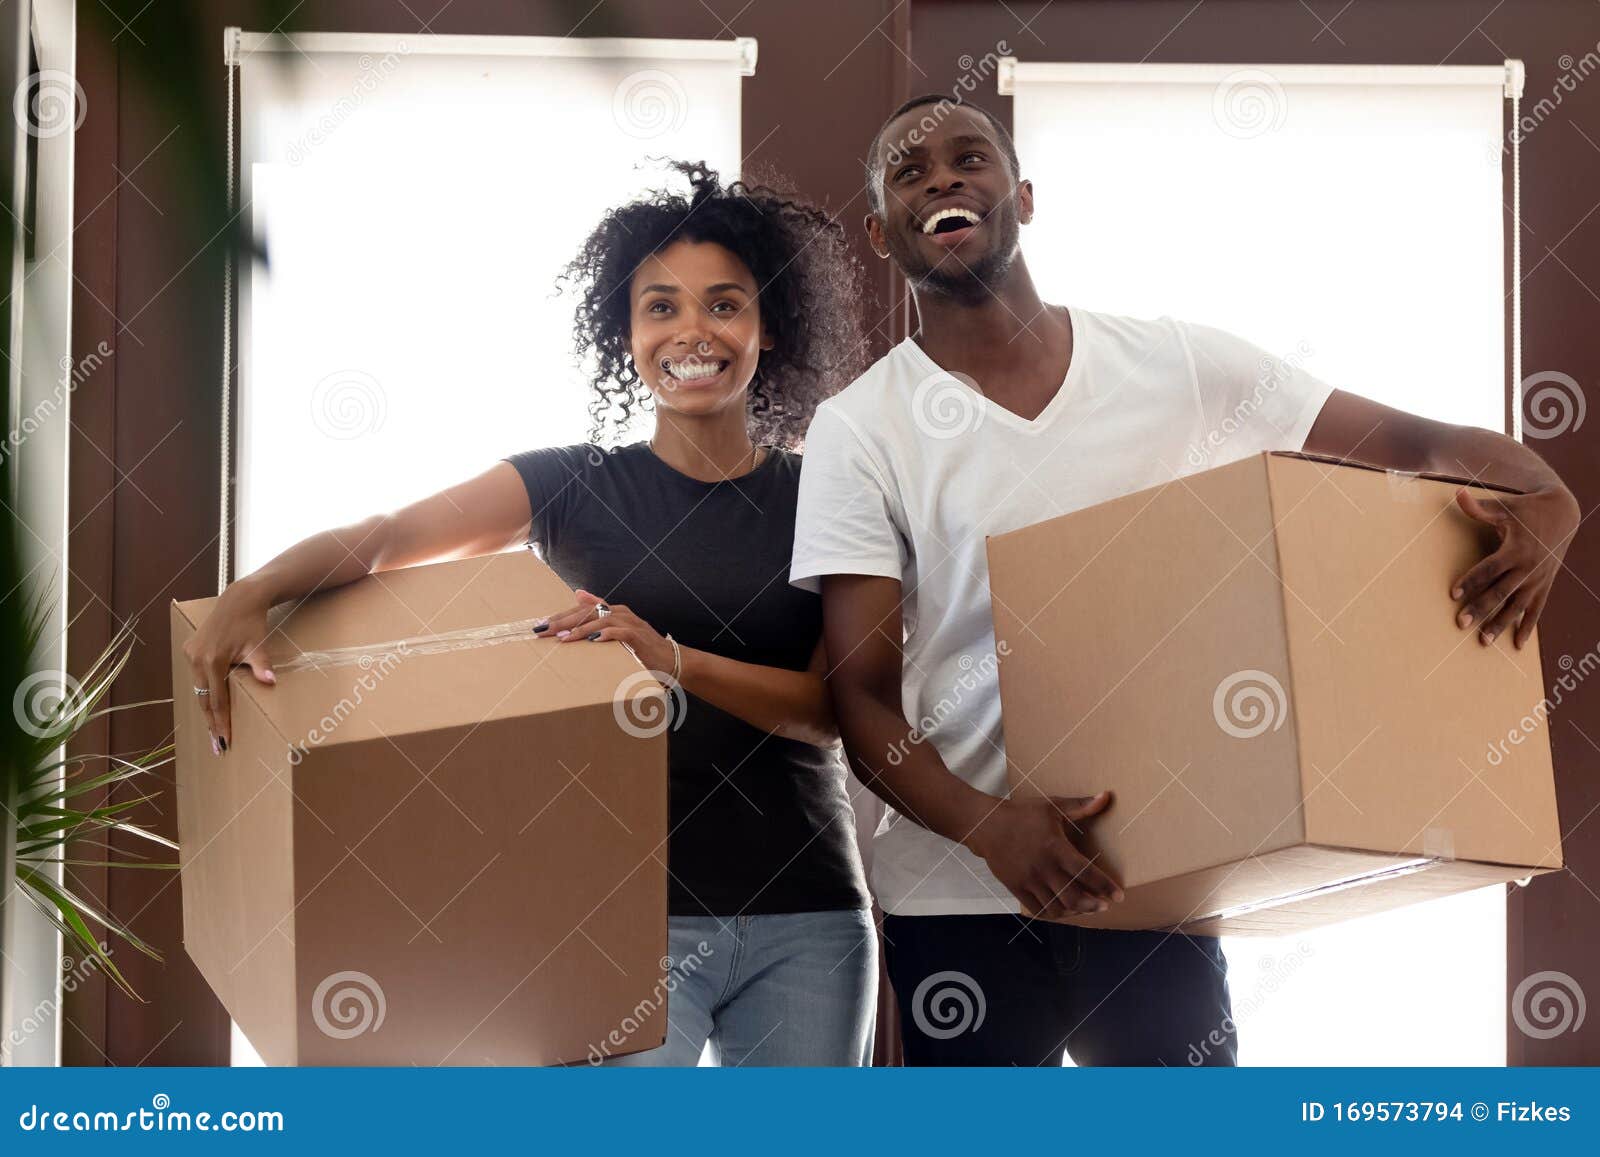 impressed black couple entering new home on moving day